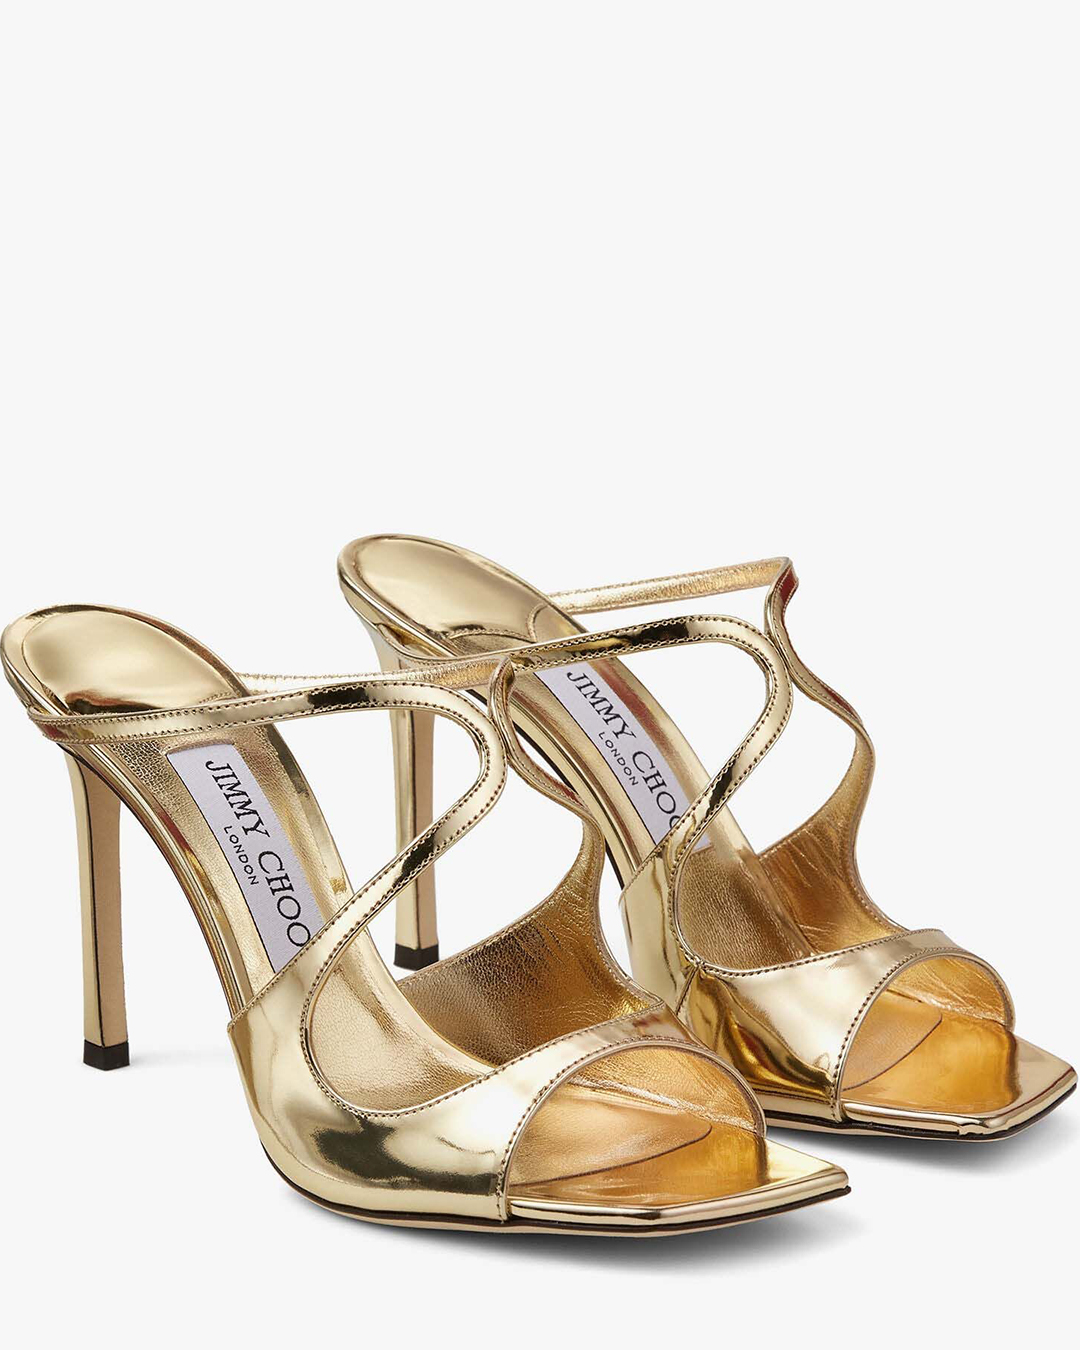 gold shoes for wedding metallic with heels jimmy choo